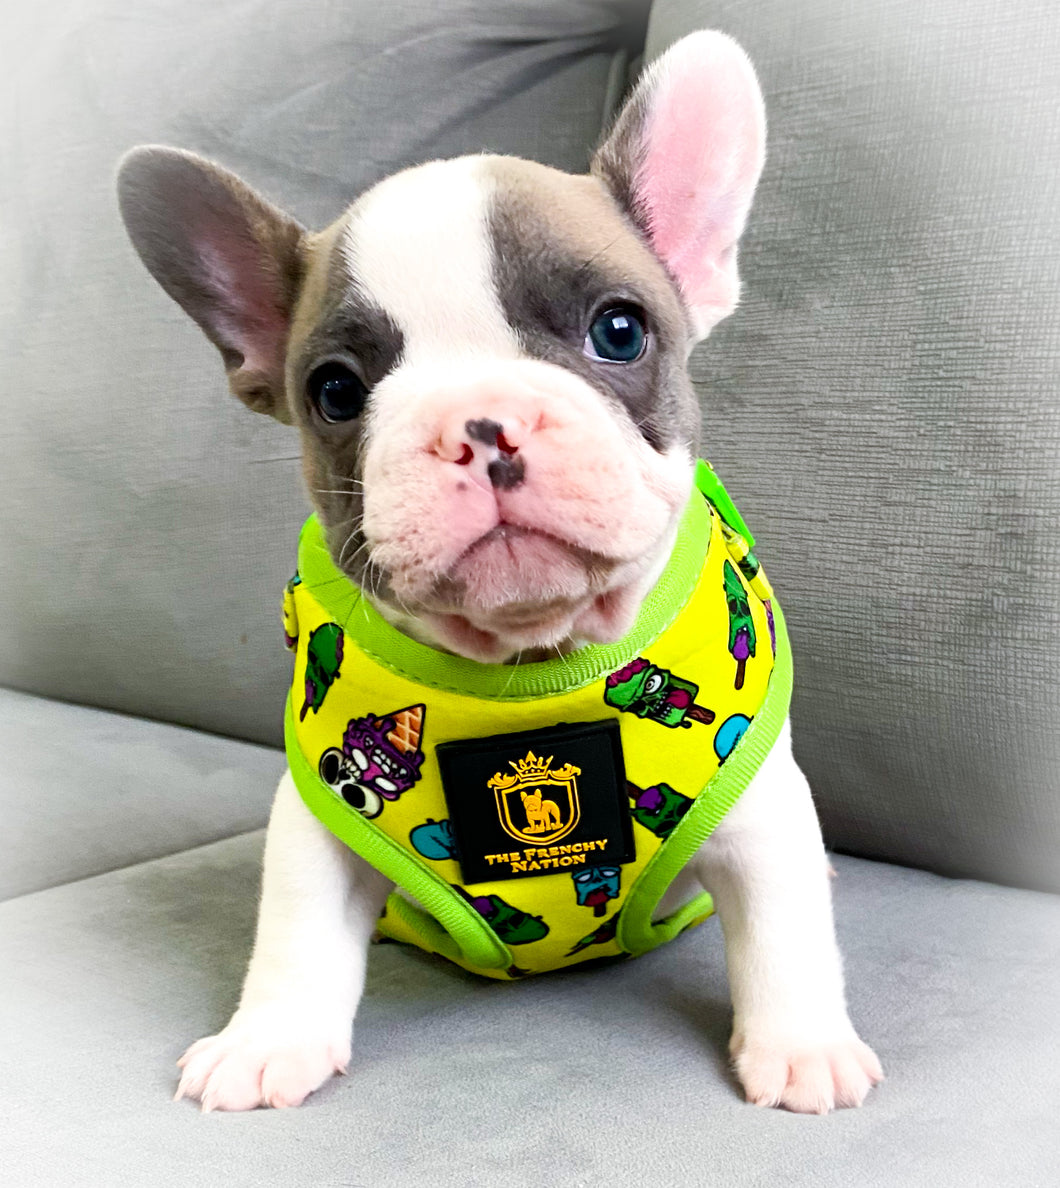 🔥NEW ARRIVAL 🔥 “Ice Screammm” 🍦🧟‍♂️🧟‍♂️Puppy Adjustable Harness